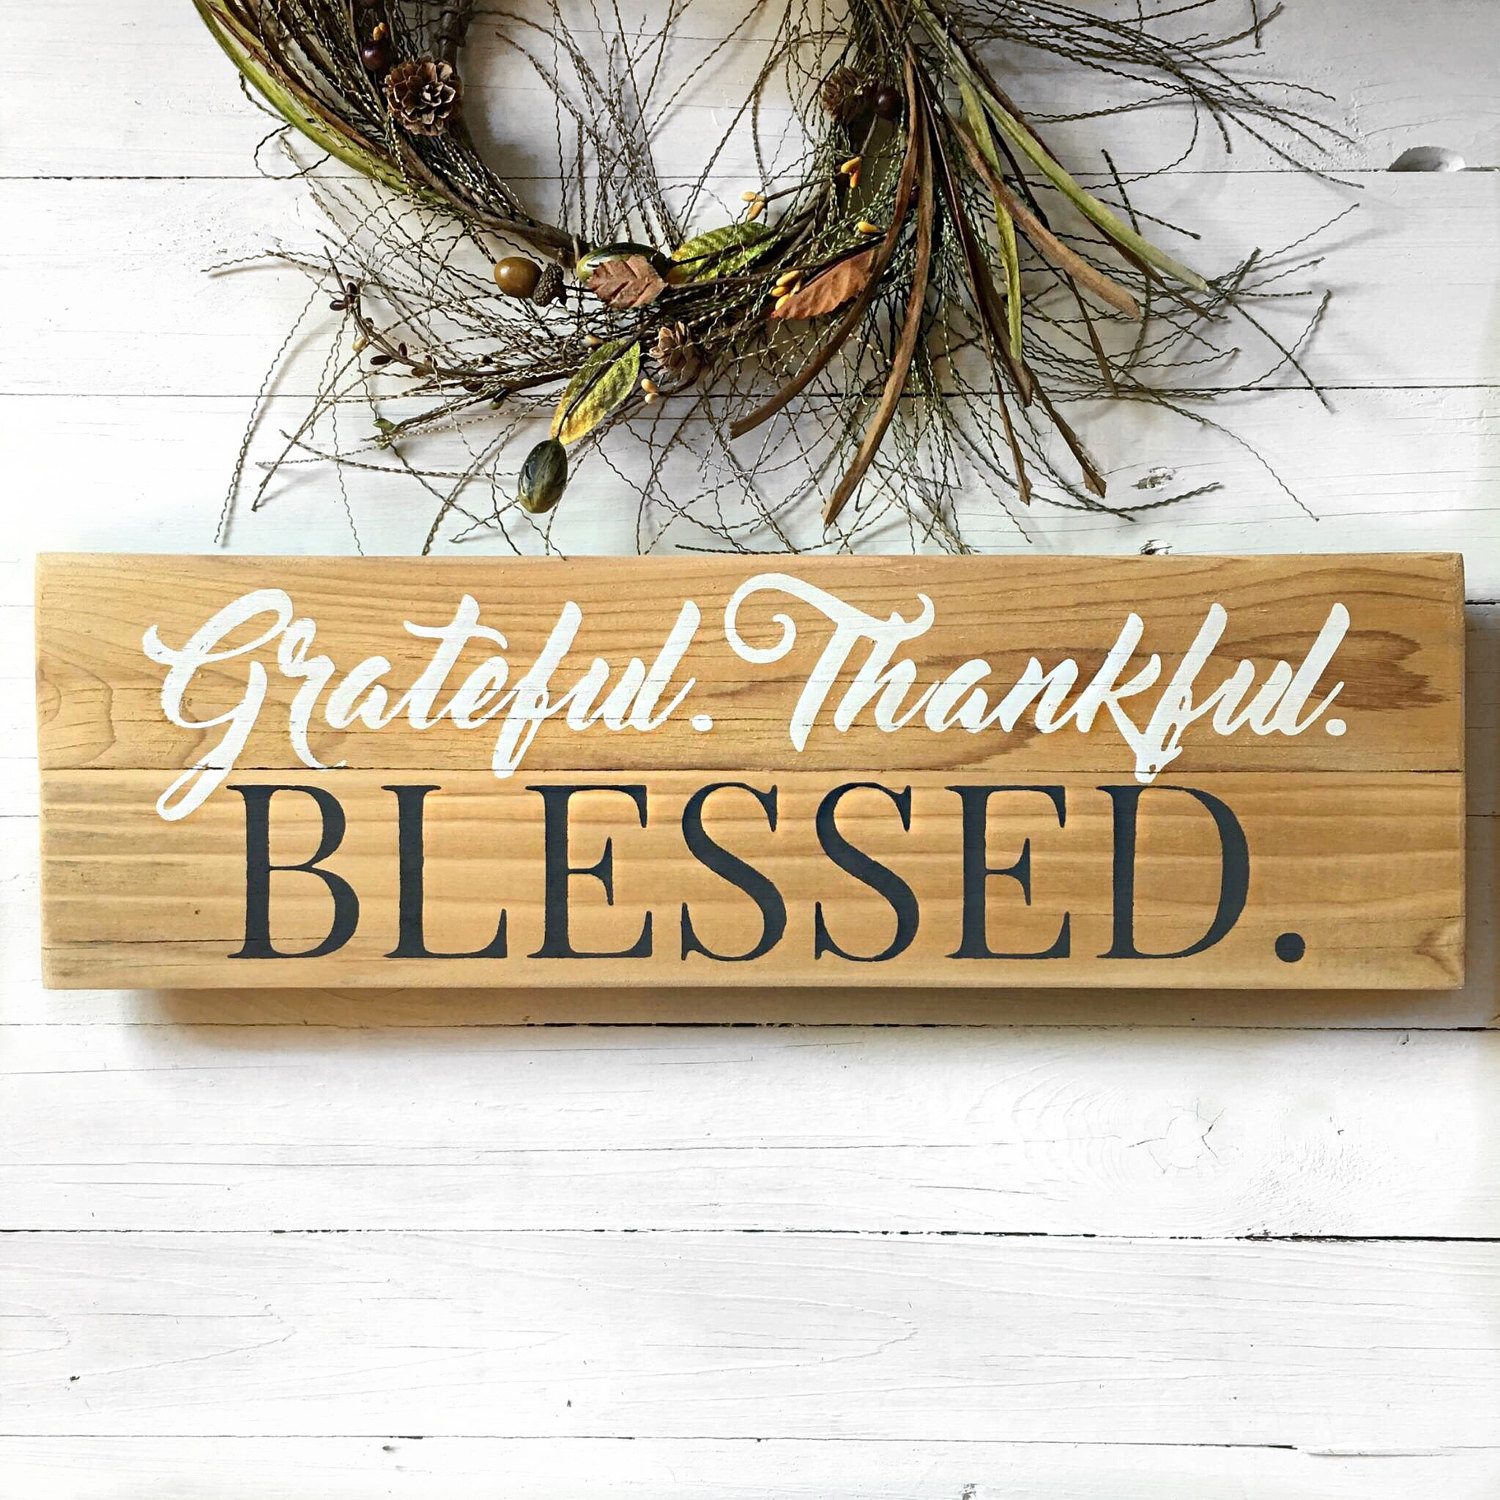 Grateful Thankful Blessed sign | Grateful Thankful Blessed on wood | Reclaimed wood sign | Farmhouse style sign